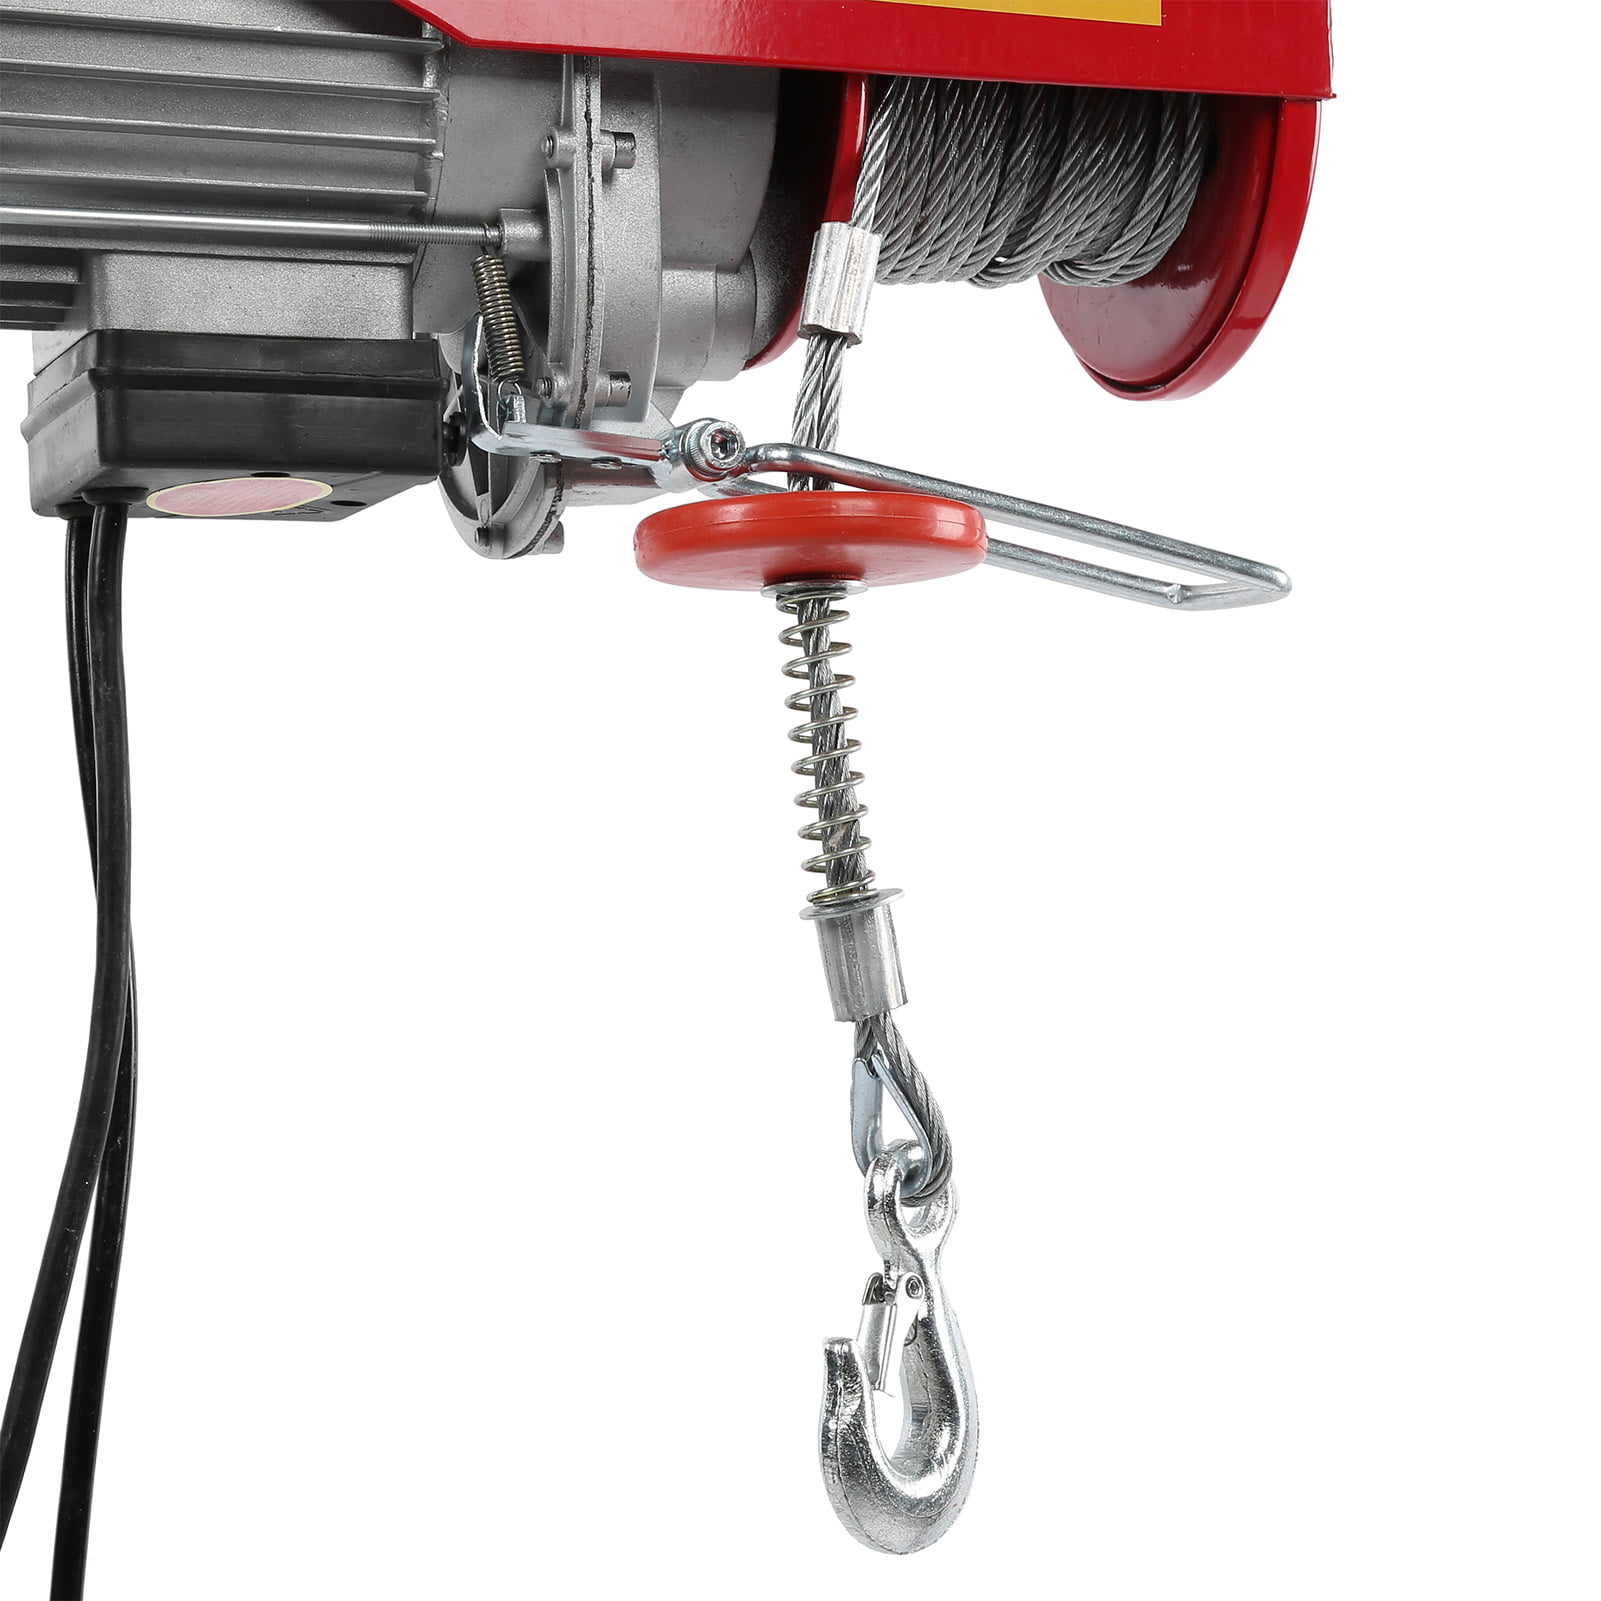 400-800KG Electric Cable Winch Lift Hoist Tools with 12 Meters Steel Wire Rope 